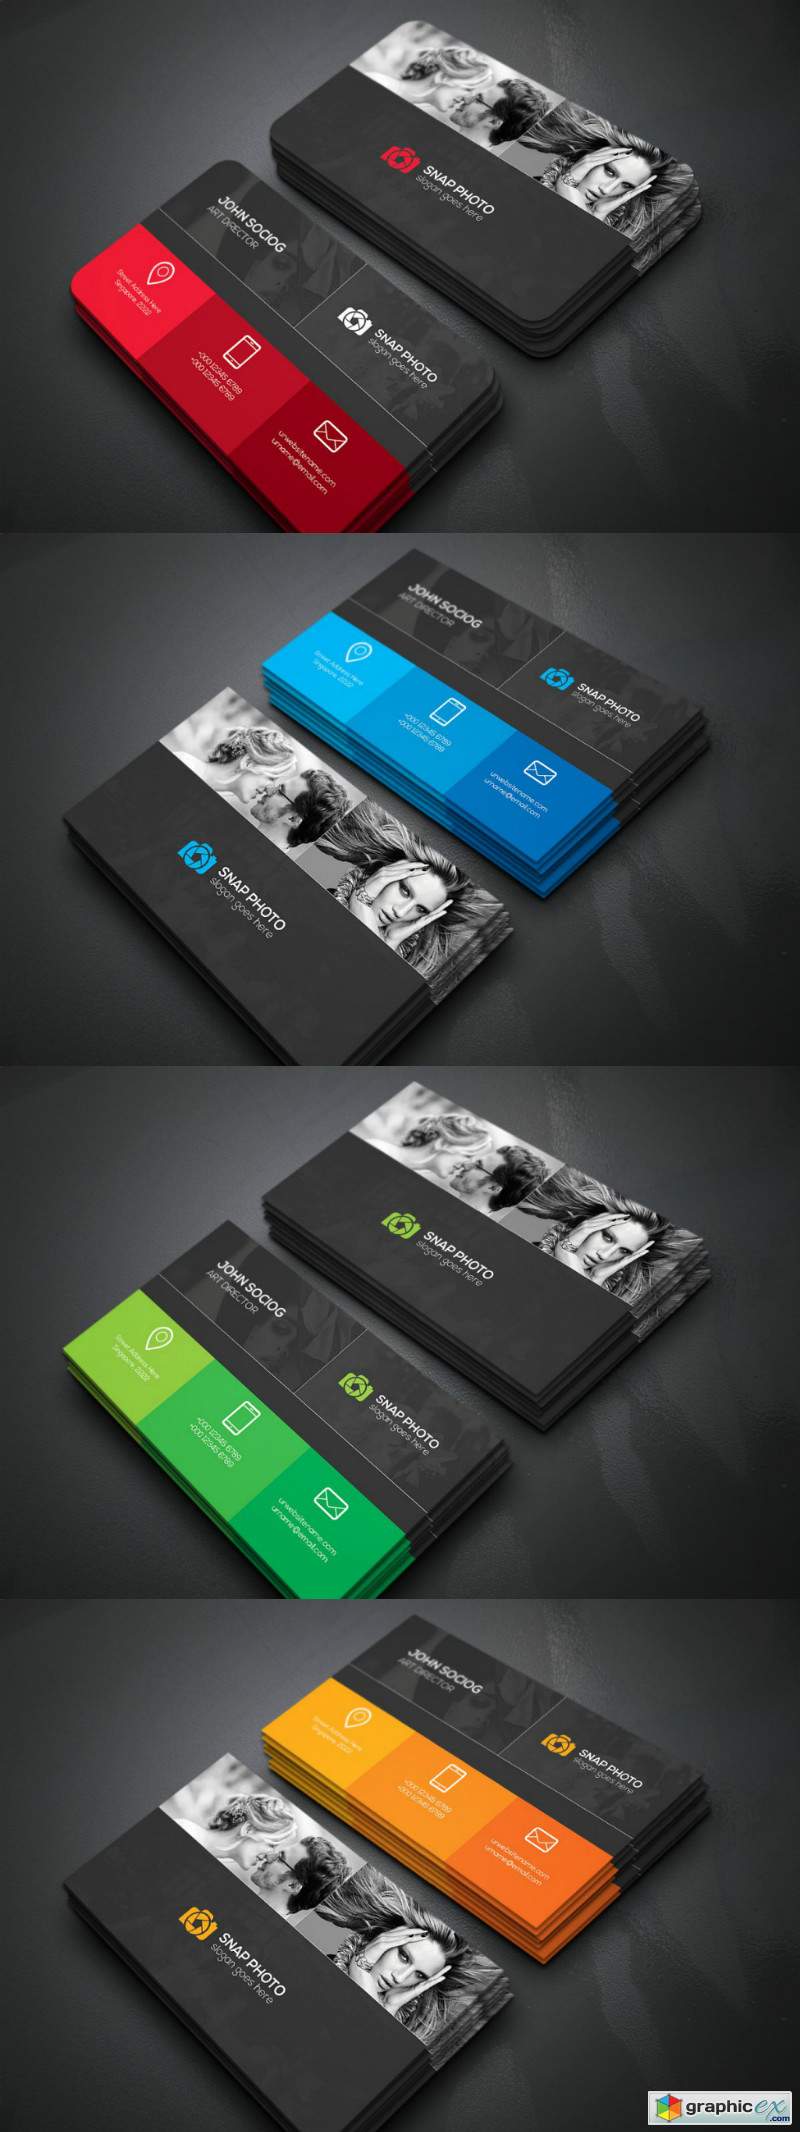 Photography Business Cards 3239919